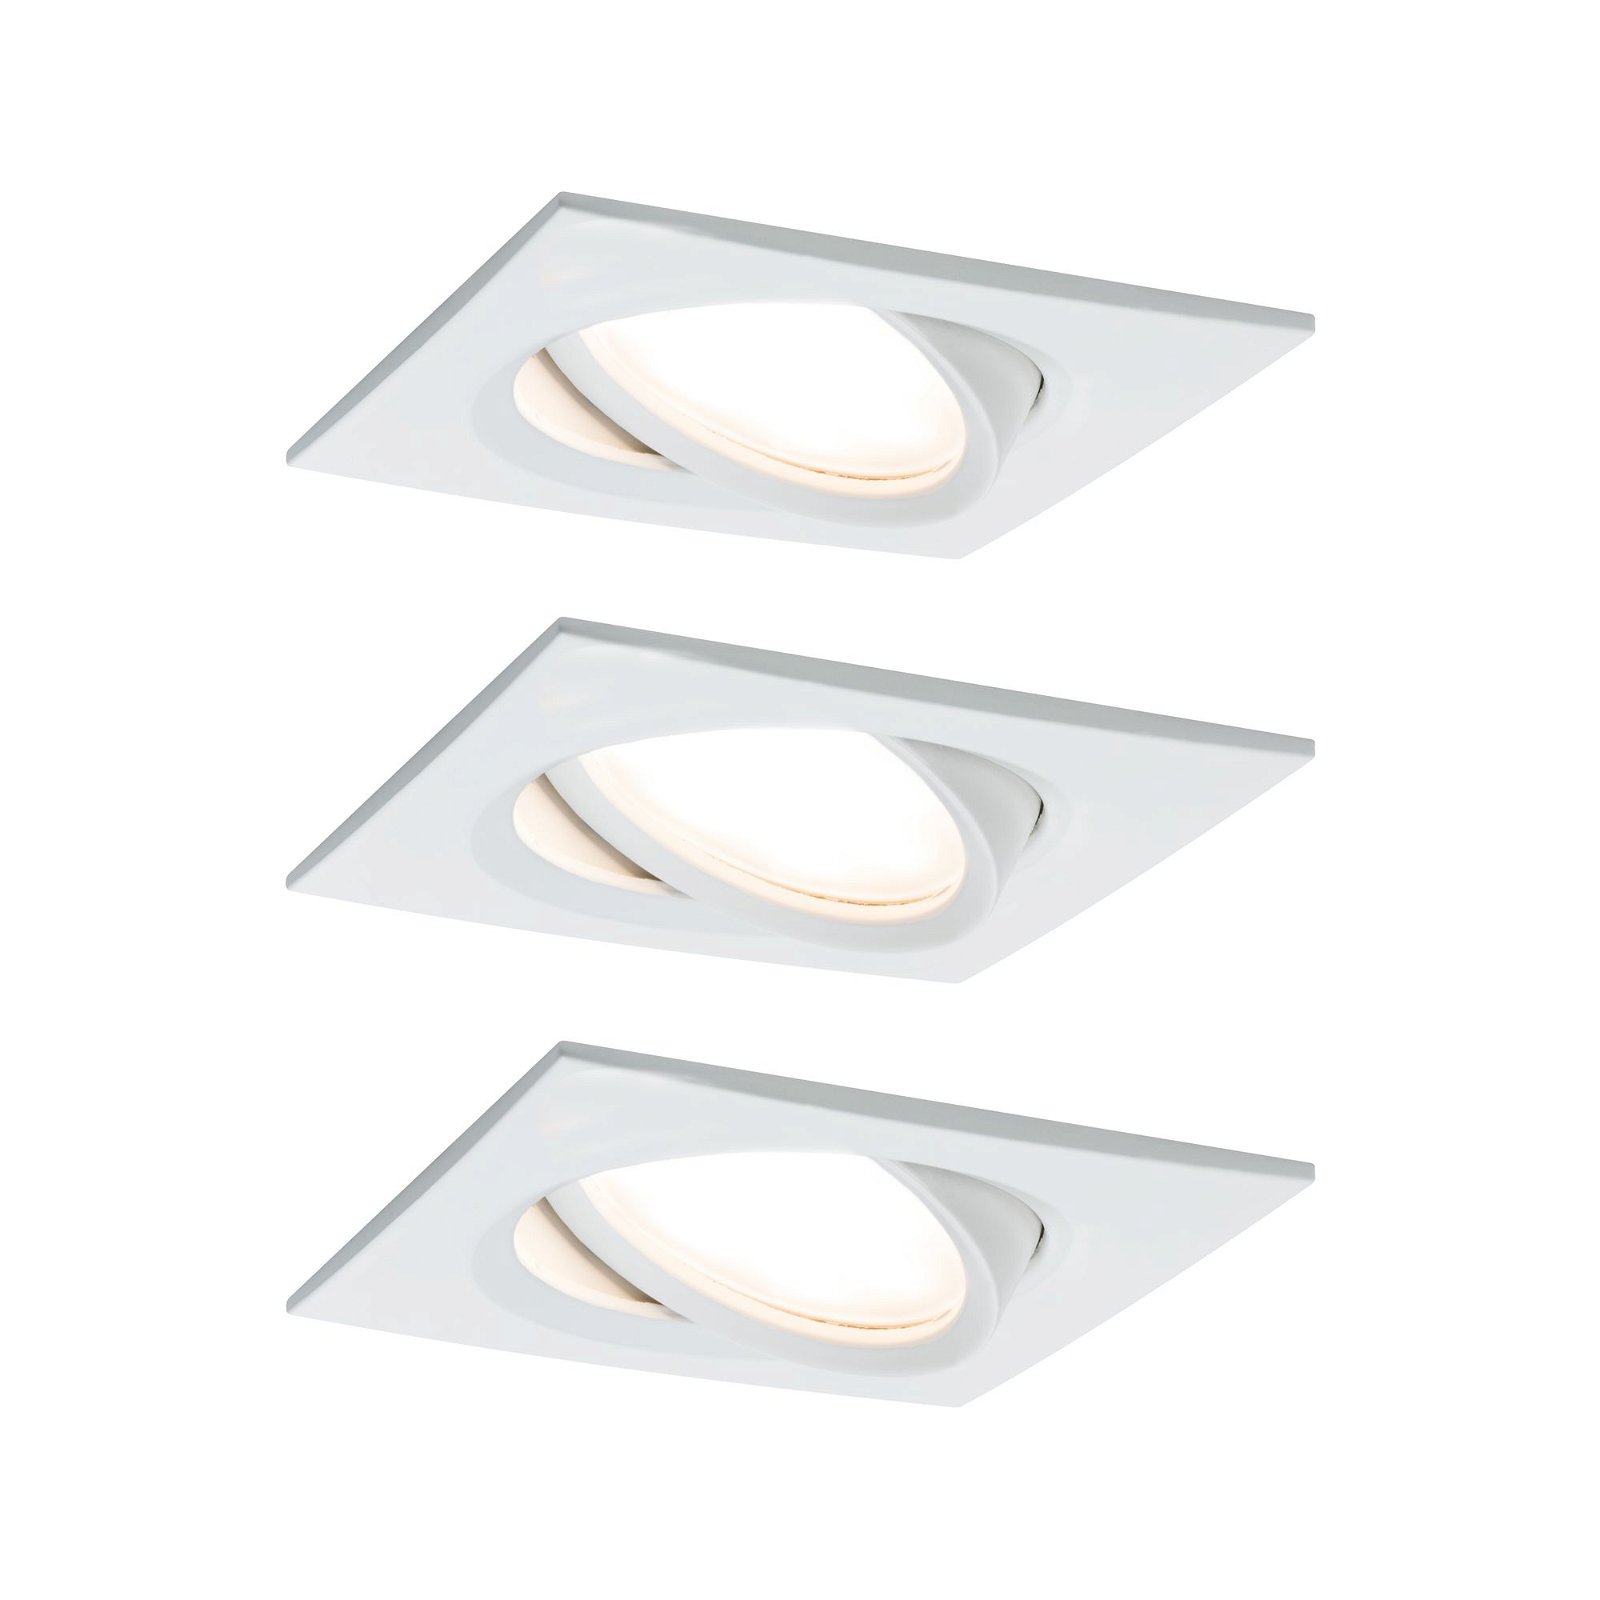 Recessed spotlight light solutions Nova Premium the from Plus manufacturer directly –